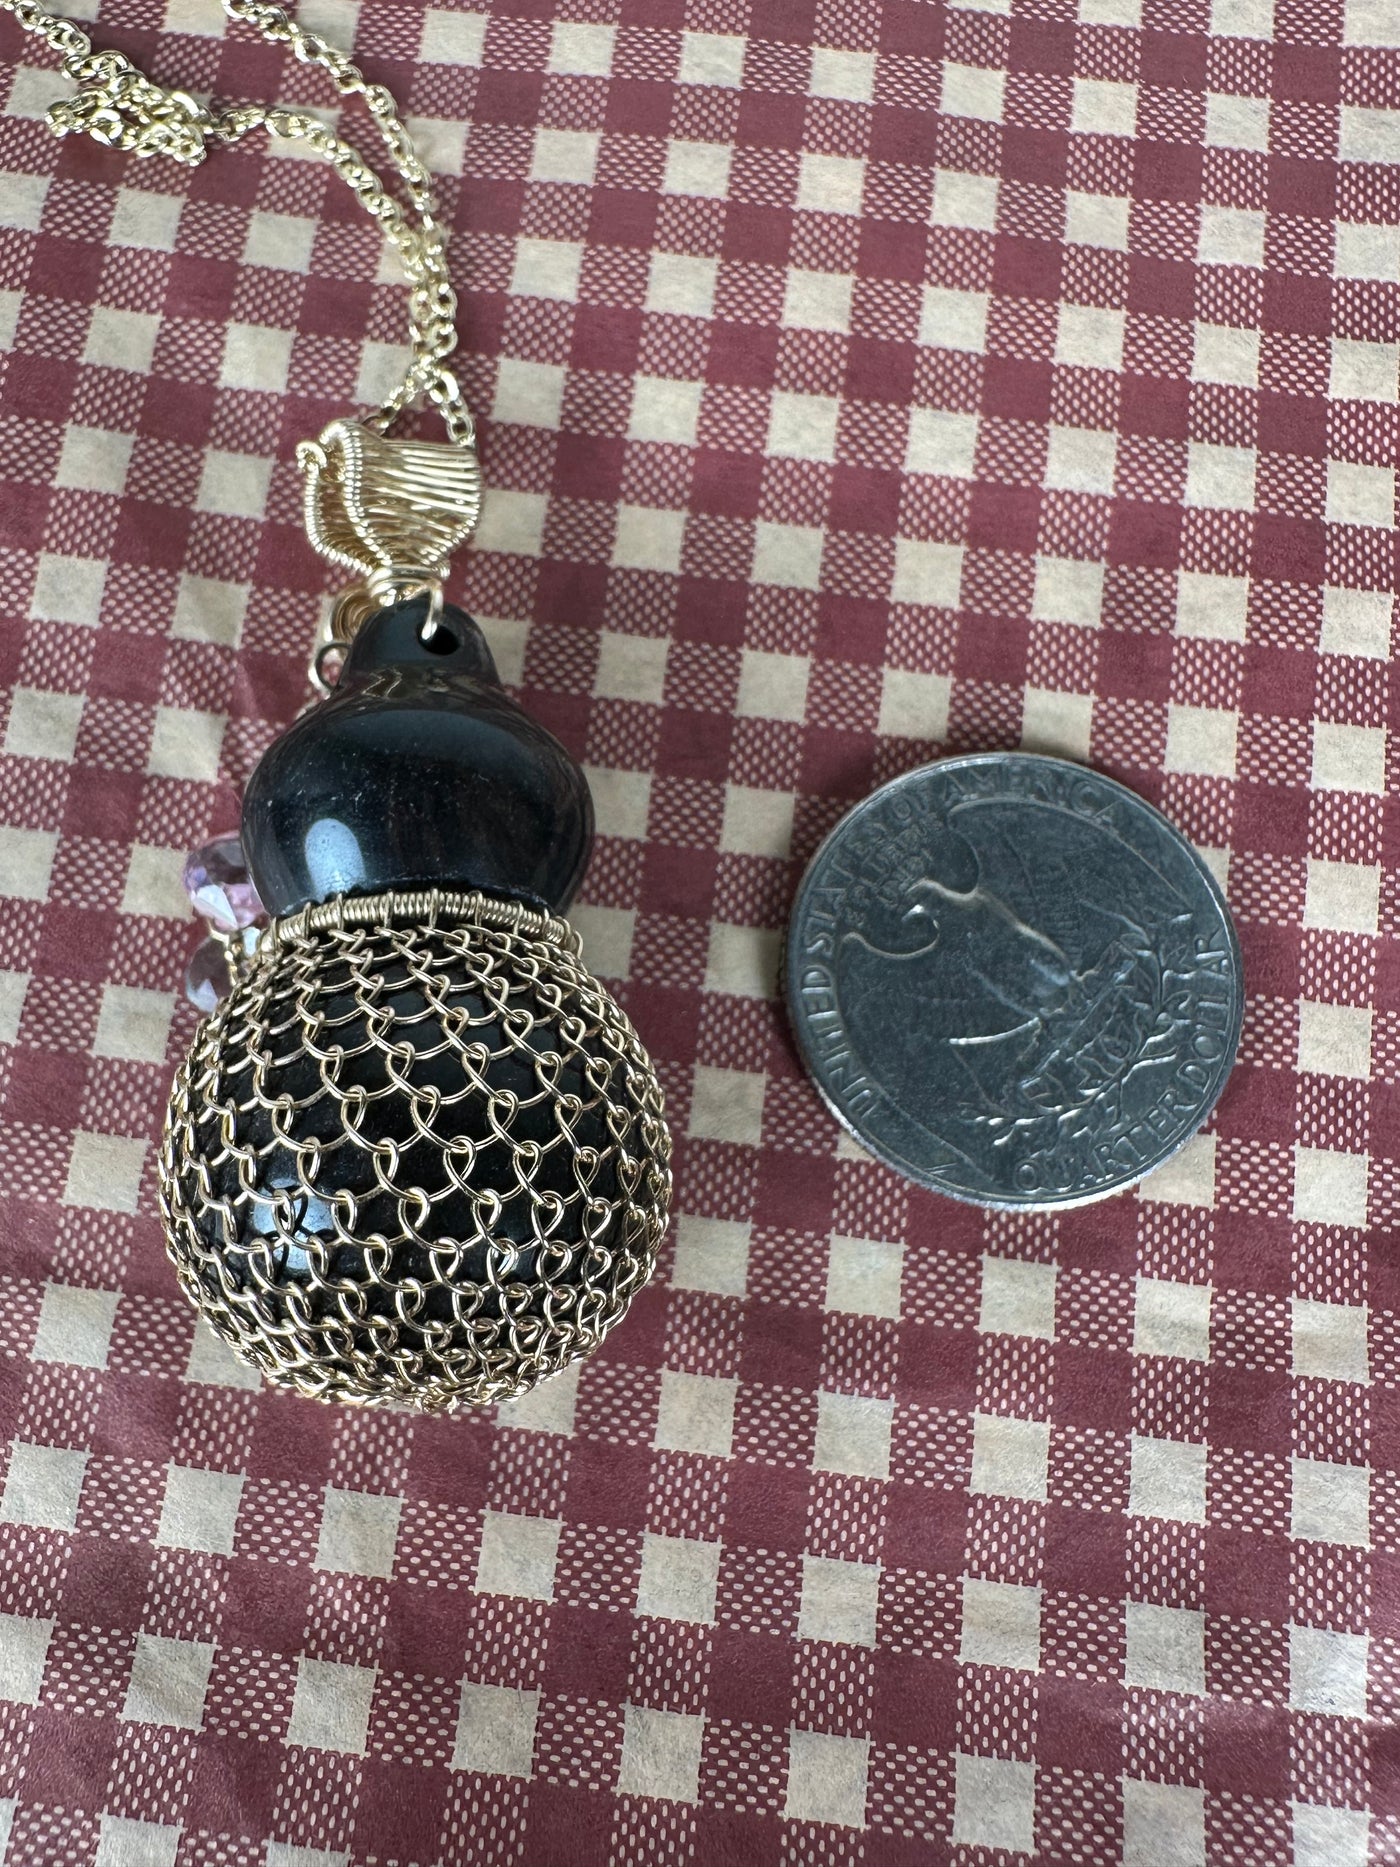 Black Agate and Multiple Gems Pendant Created by a Local Artist